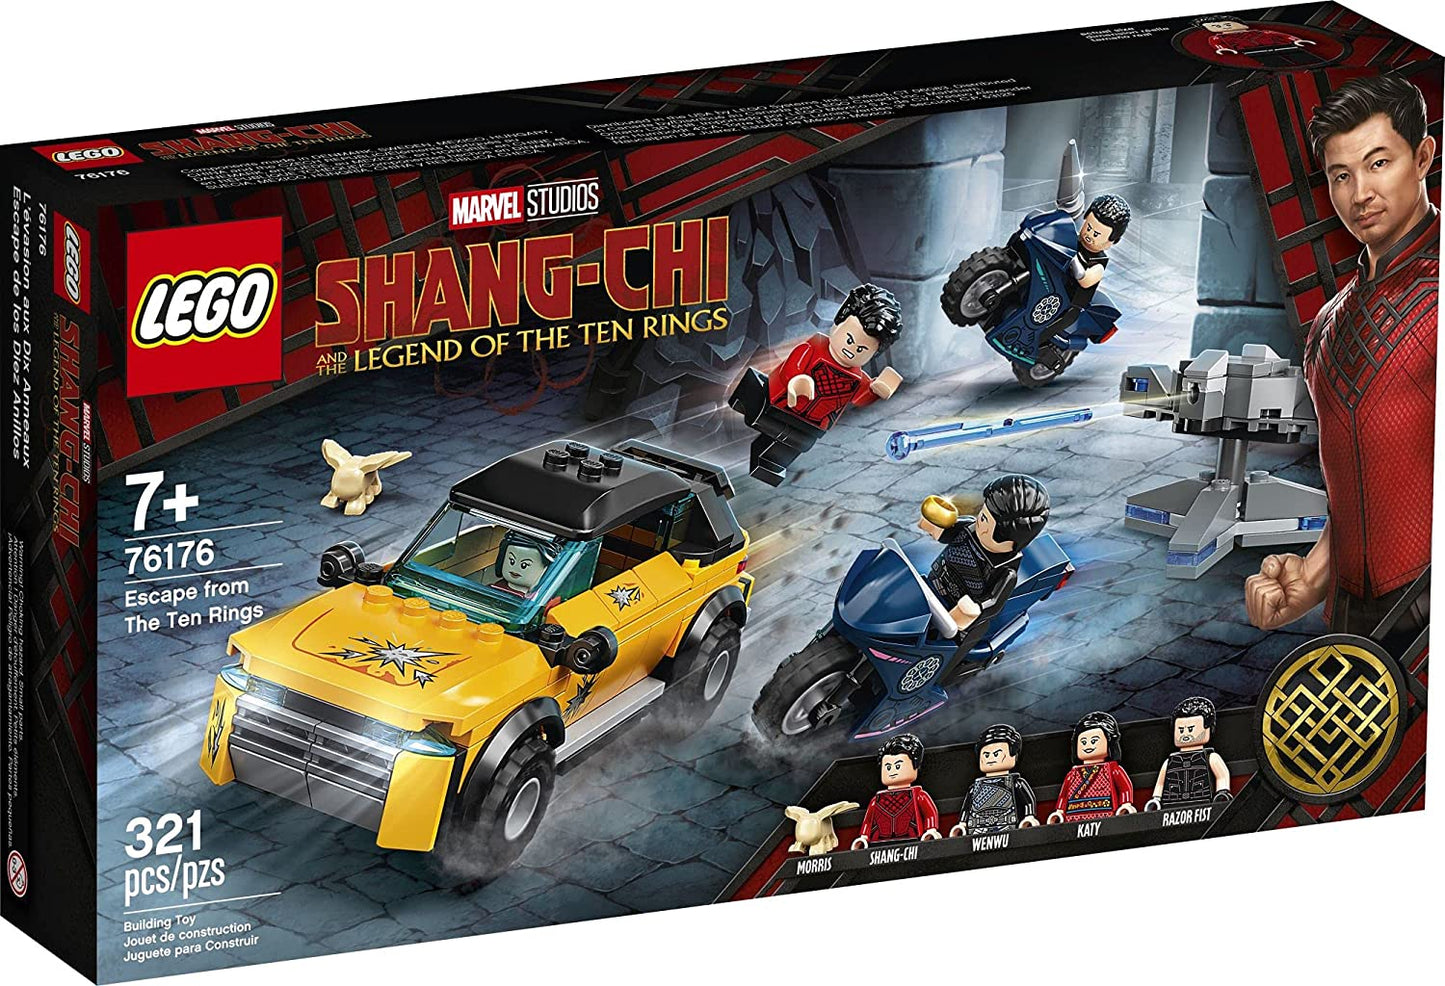 Lego Marvel Shang-Chi 76176 Escape from The Ten Rings